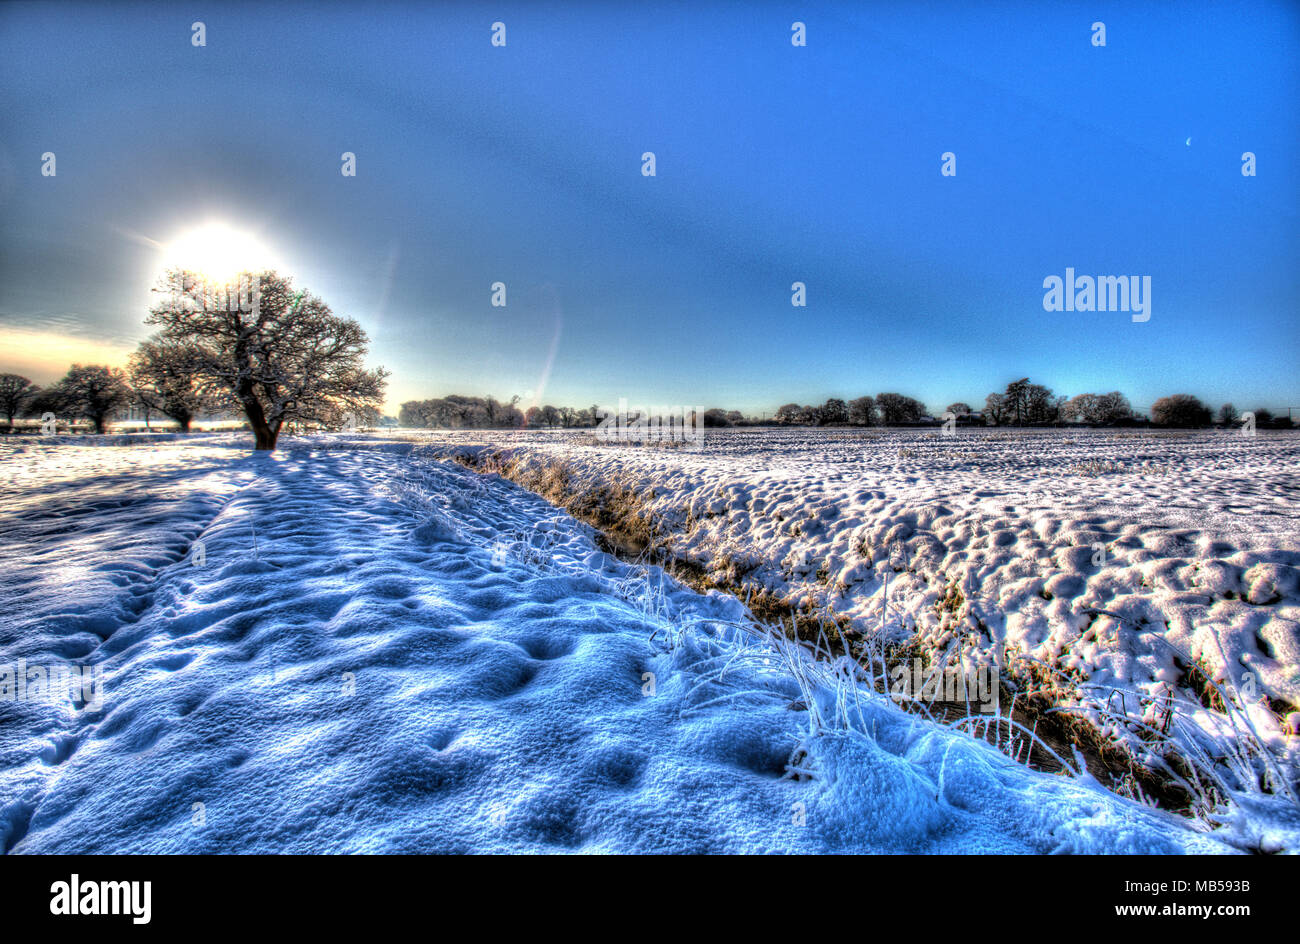 Village of Coddington, England. Artistic, snowy view of a pasture farming field in rural Cheshire, with a silhouetted oak tree in the background. Stock Photo